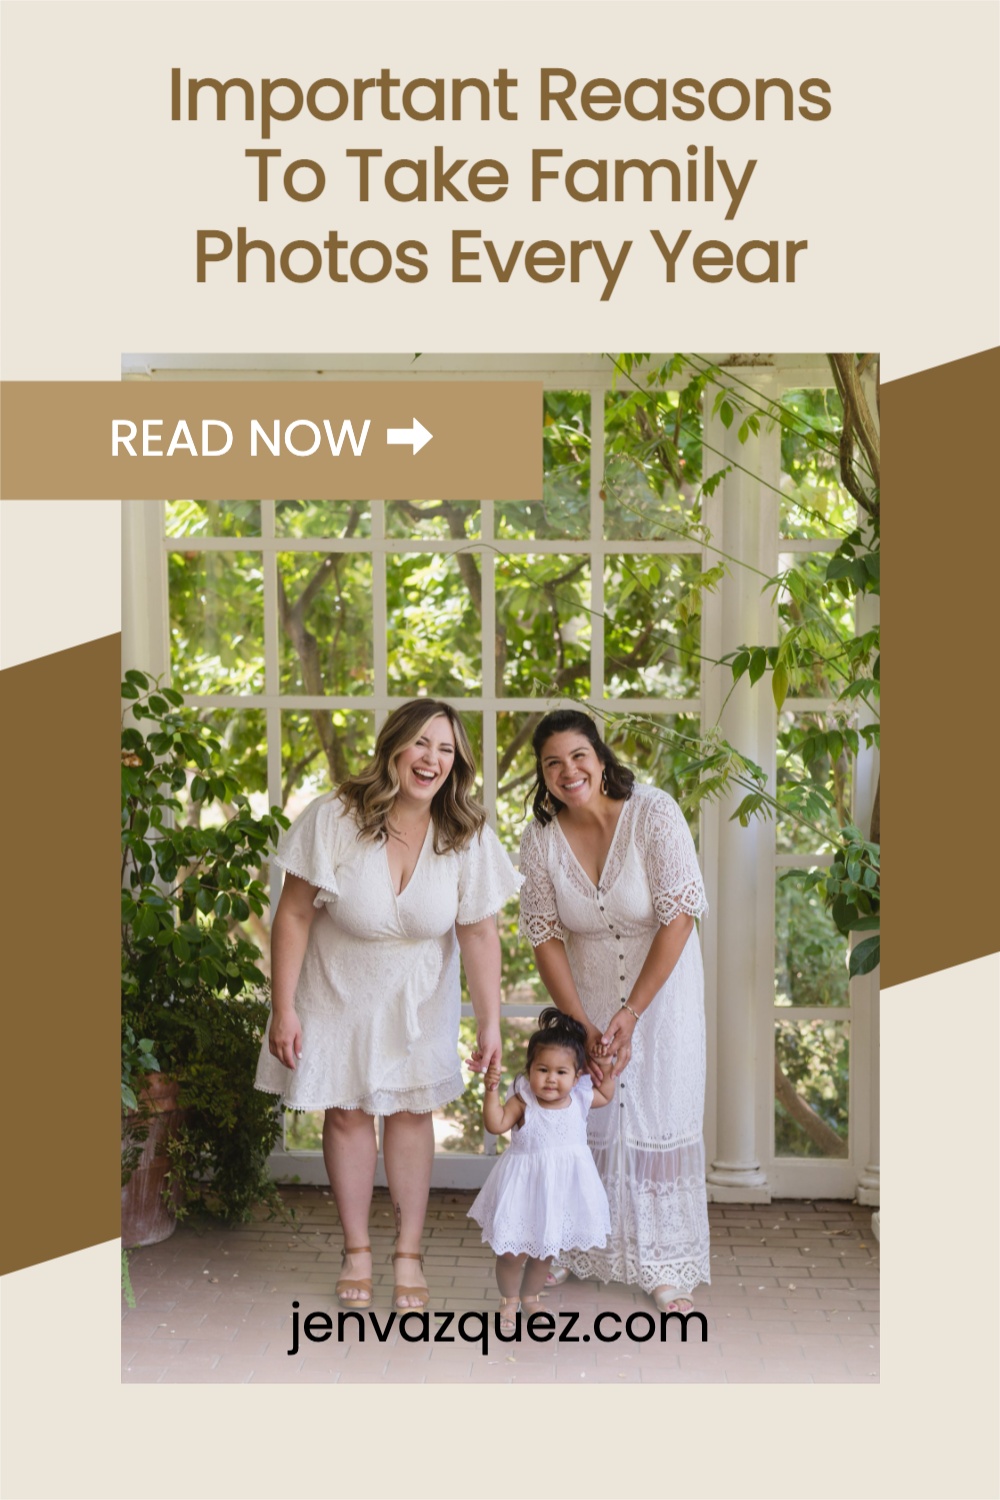 Important Reasons To Take Family Photos Every Year